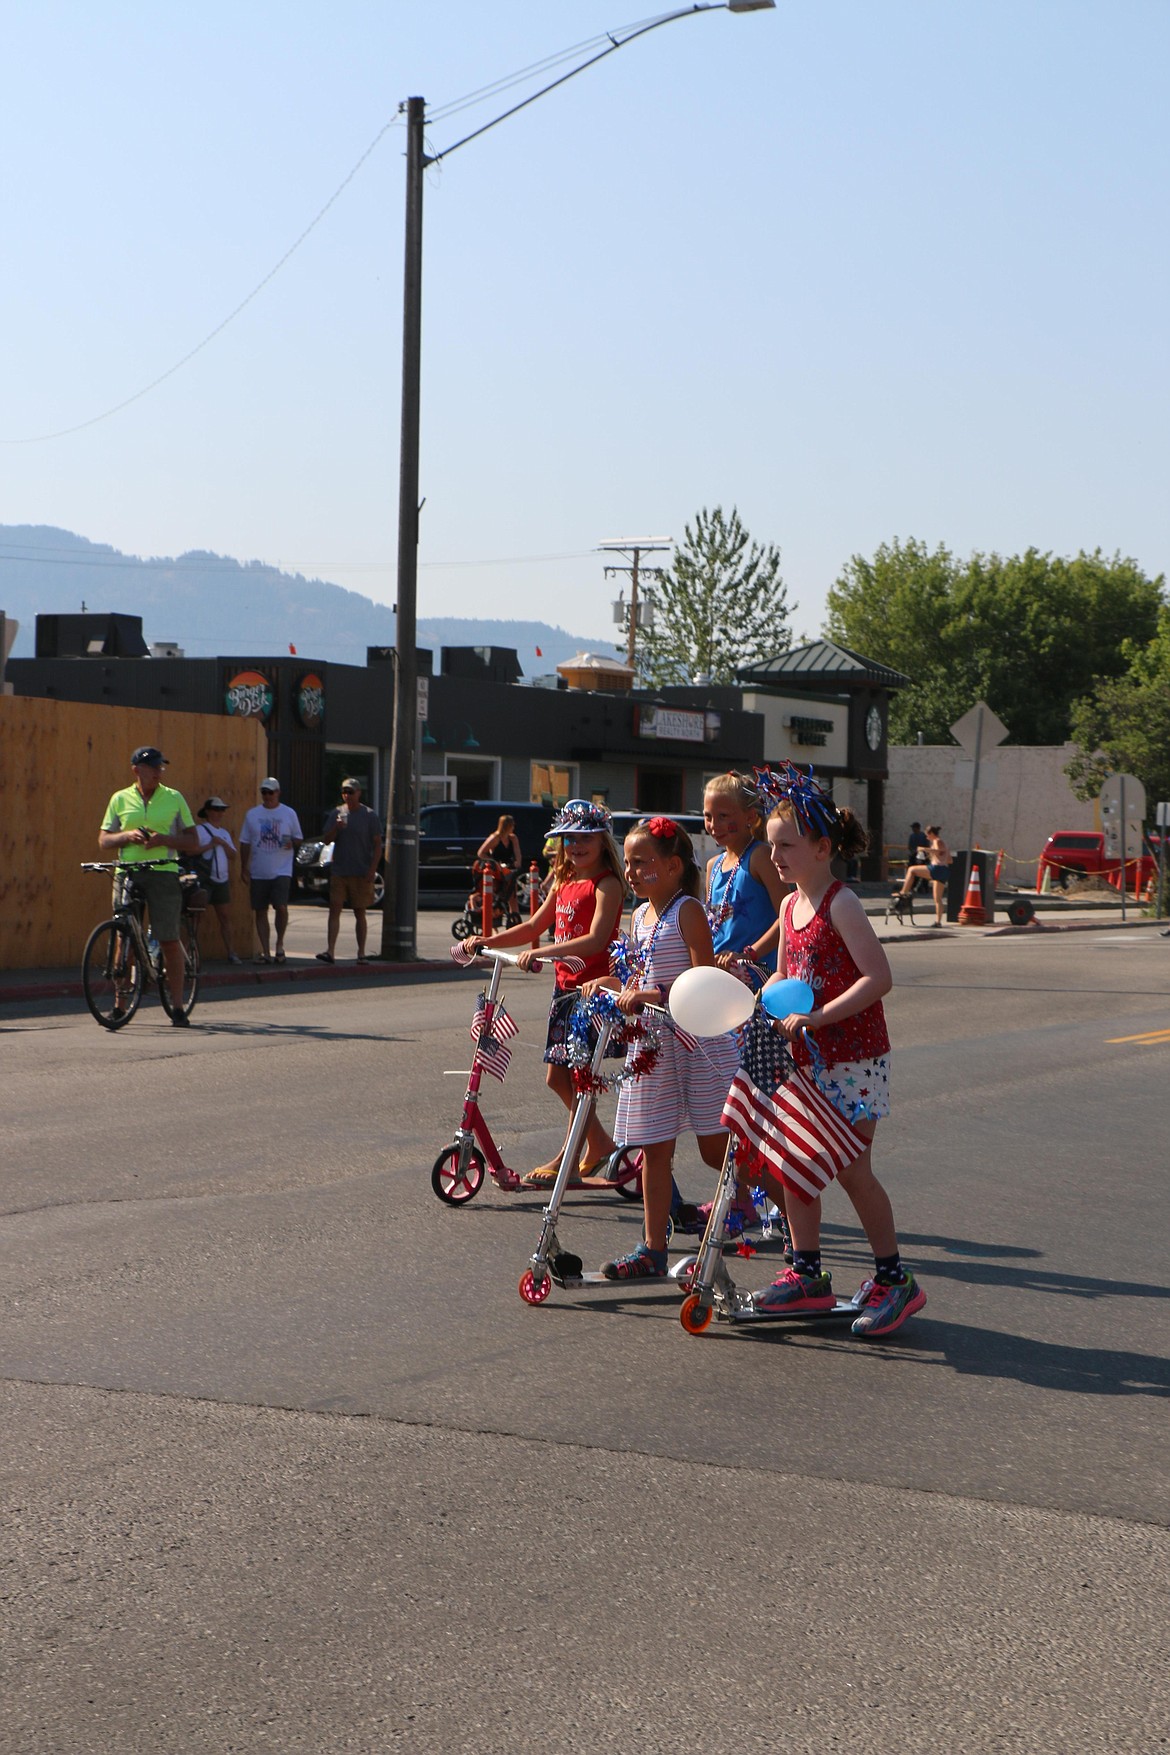 The Sandpoint Lions' Kids Parade attracted a large number of participants and parade-goers.